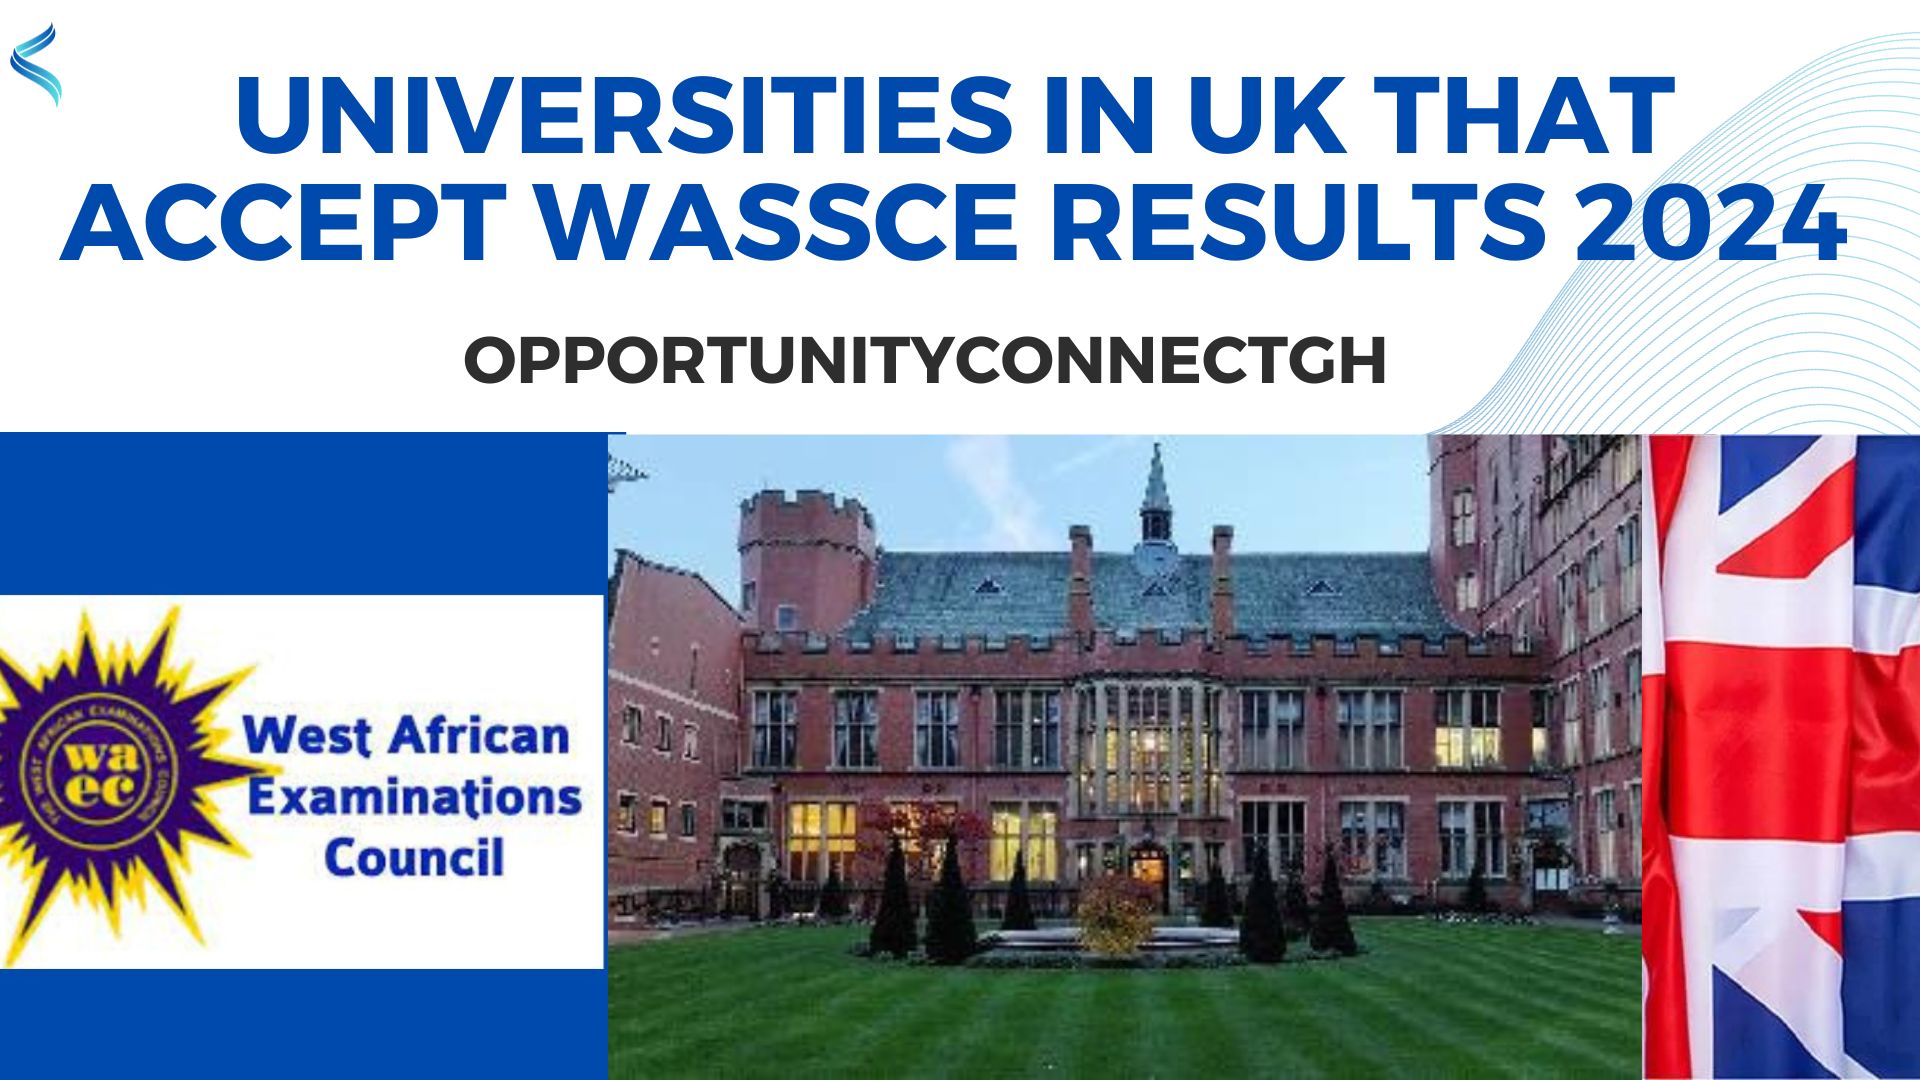 Universities in UK that Accept WASSCE Results 2024 Opportunity Connect